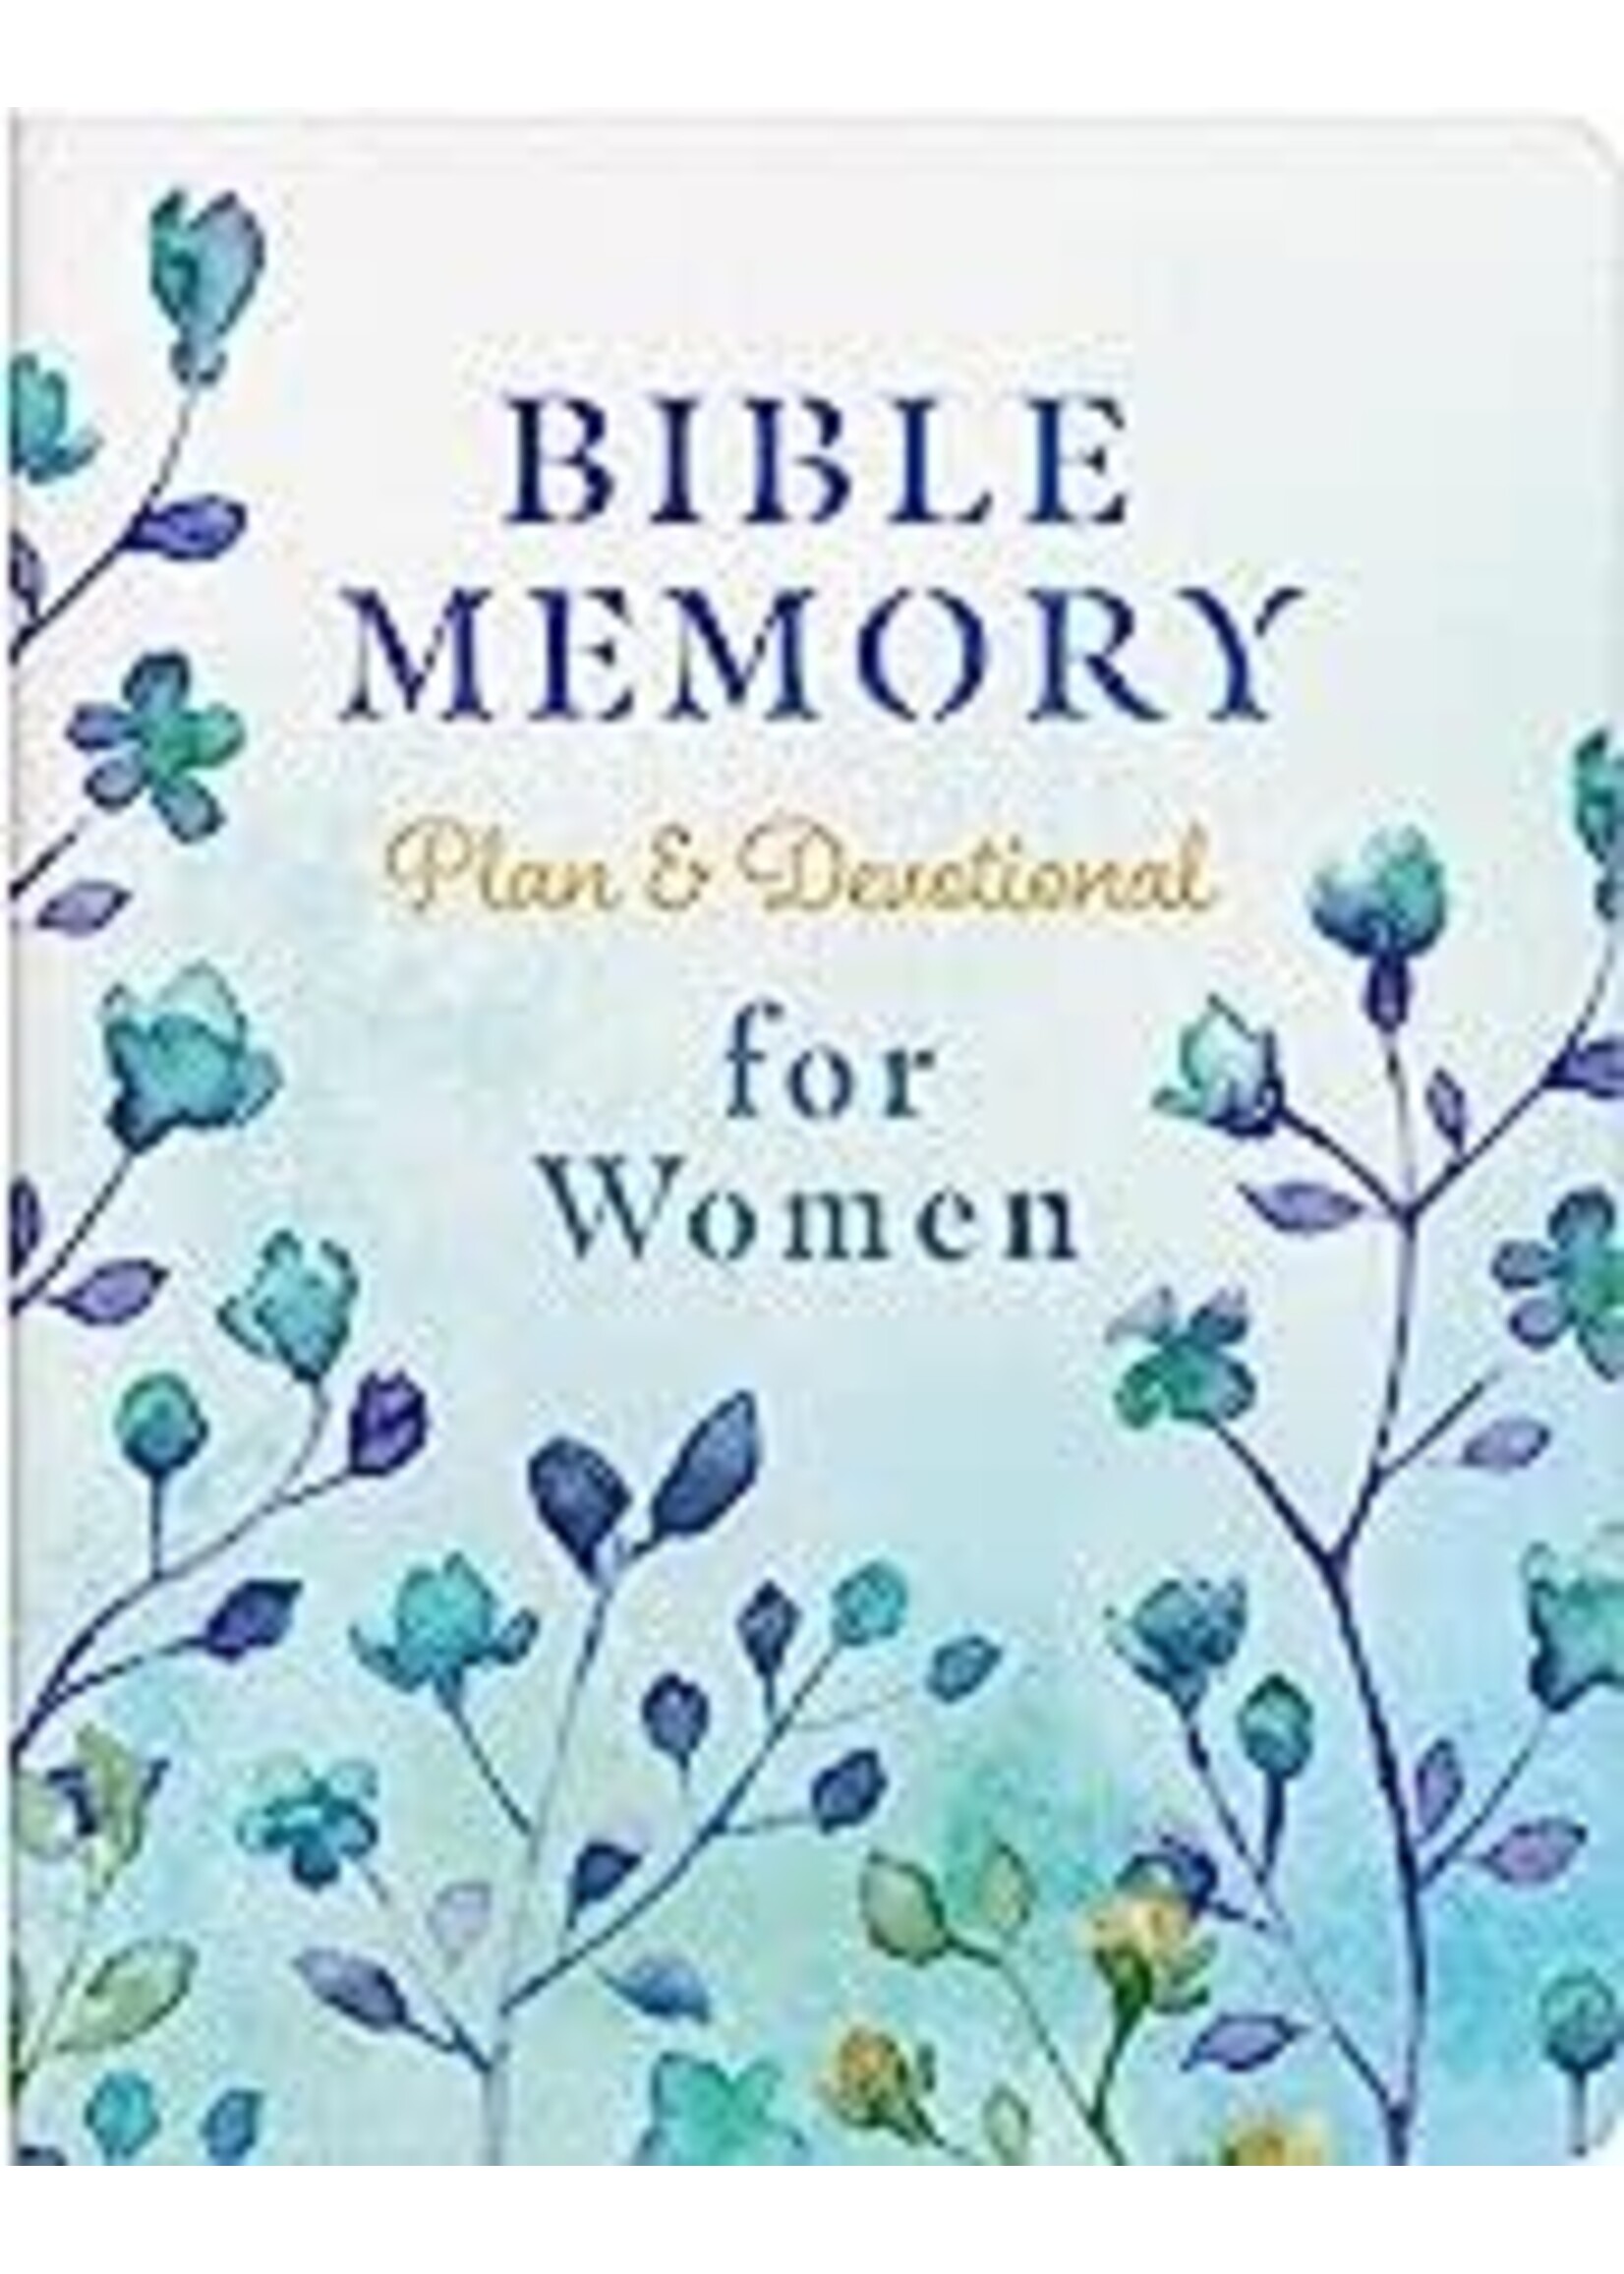 Bible Memory Plan and Devotional for Women